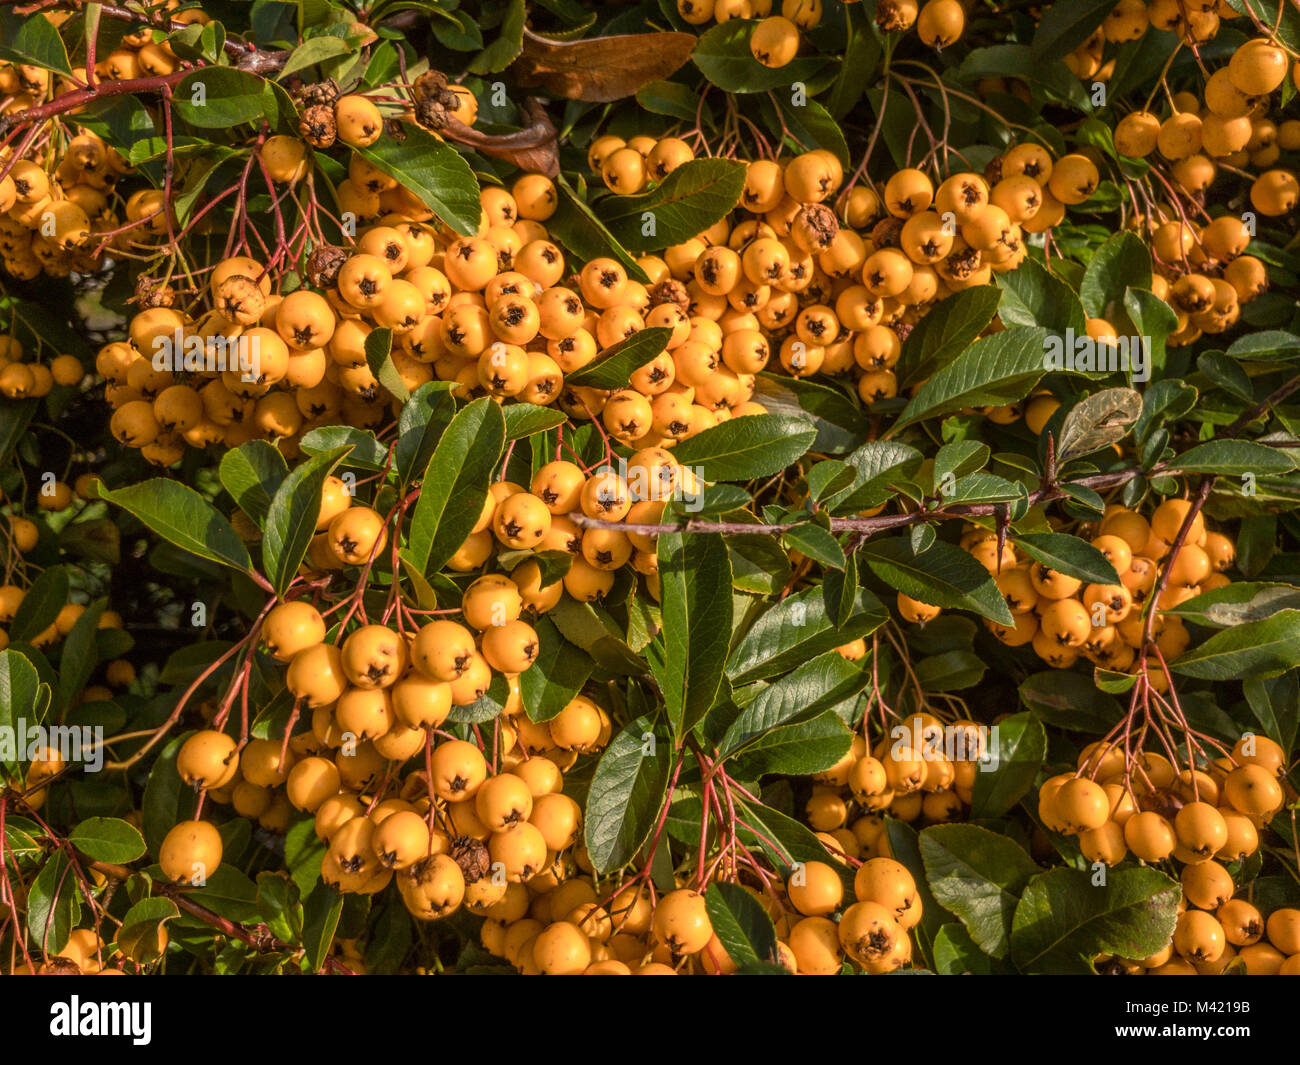 Close up shot of an abundance of winter berries on a garden shrub.  The berries are yellow and very vibrant Stock Photo